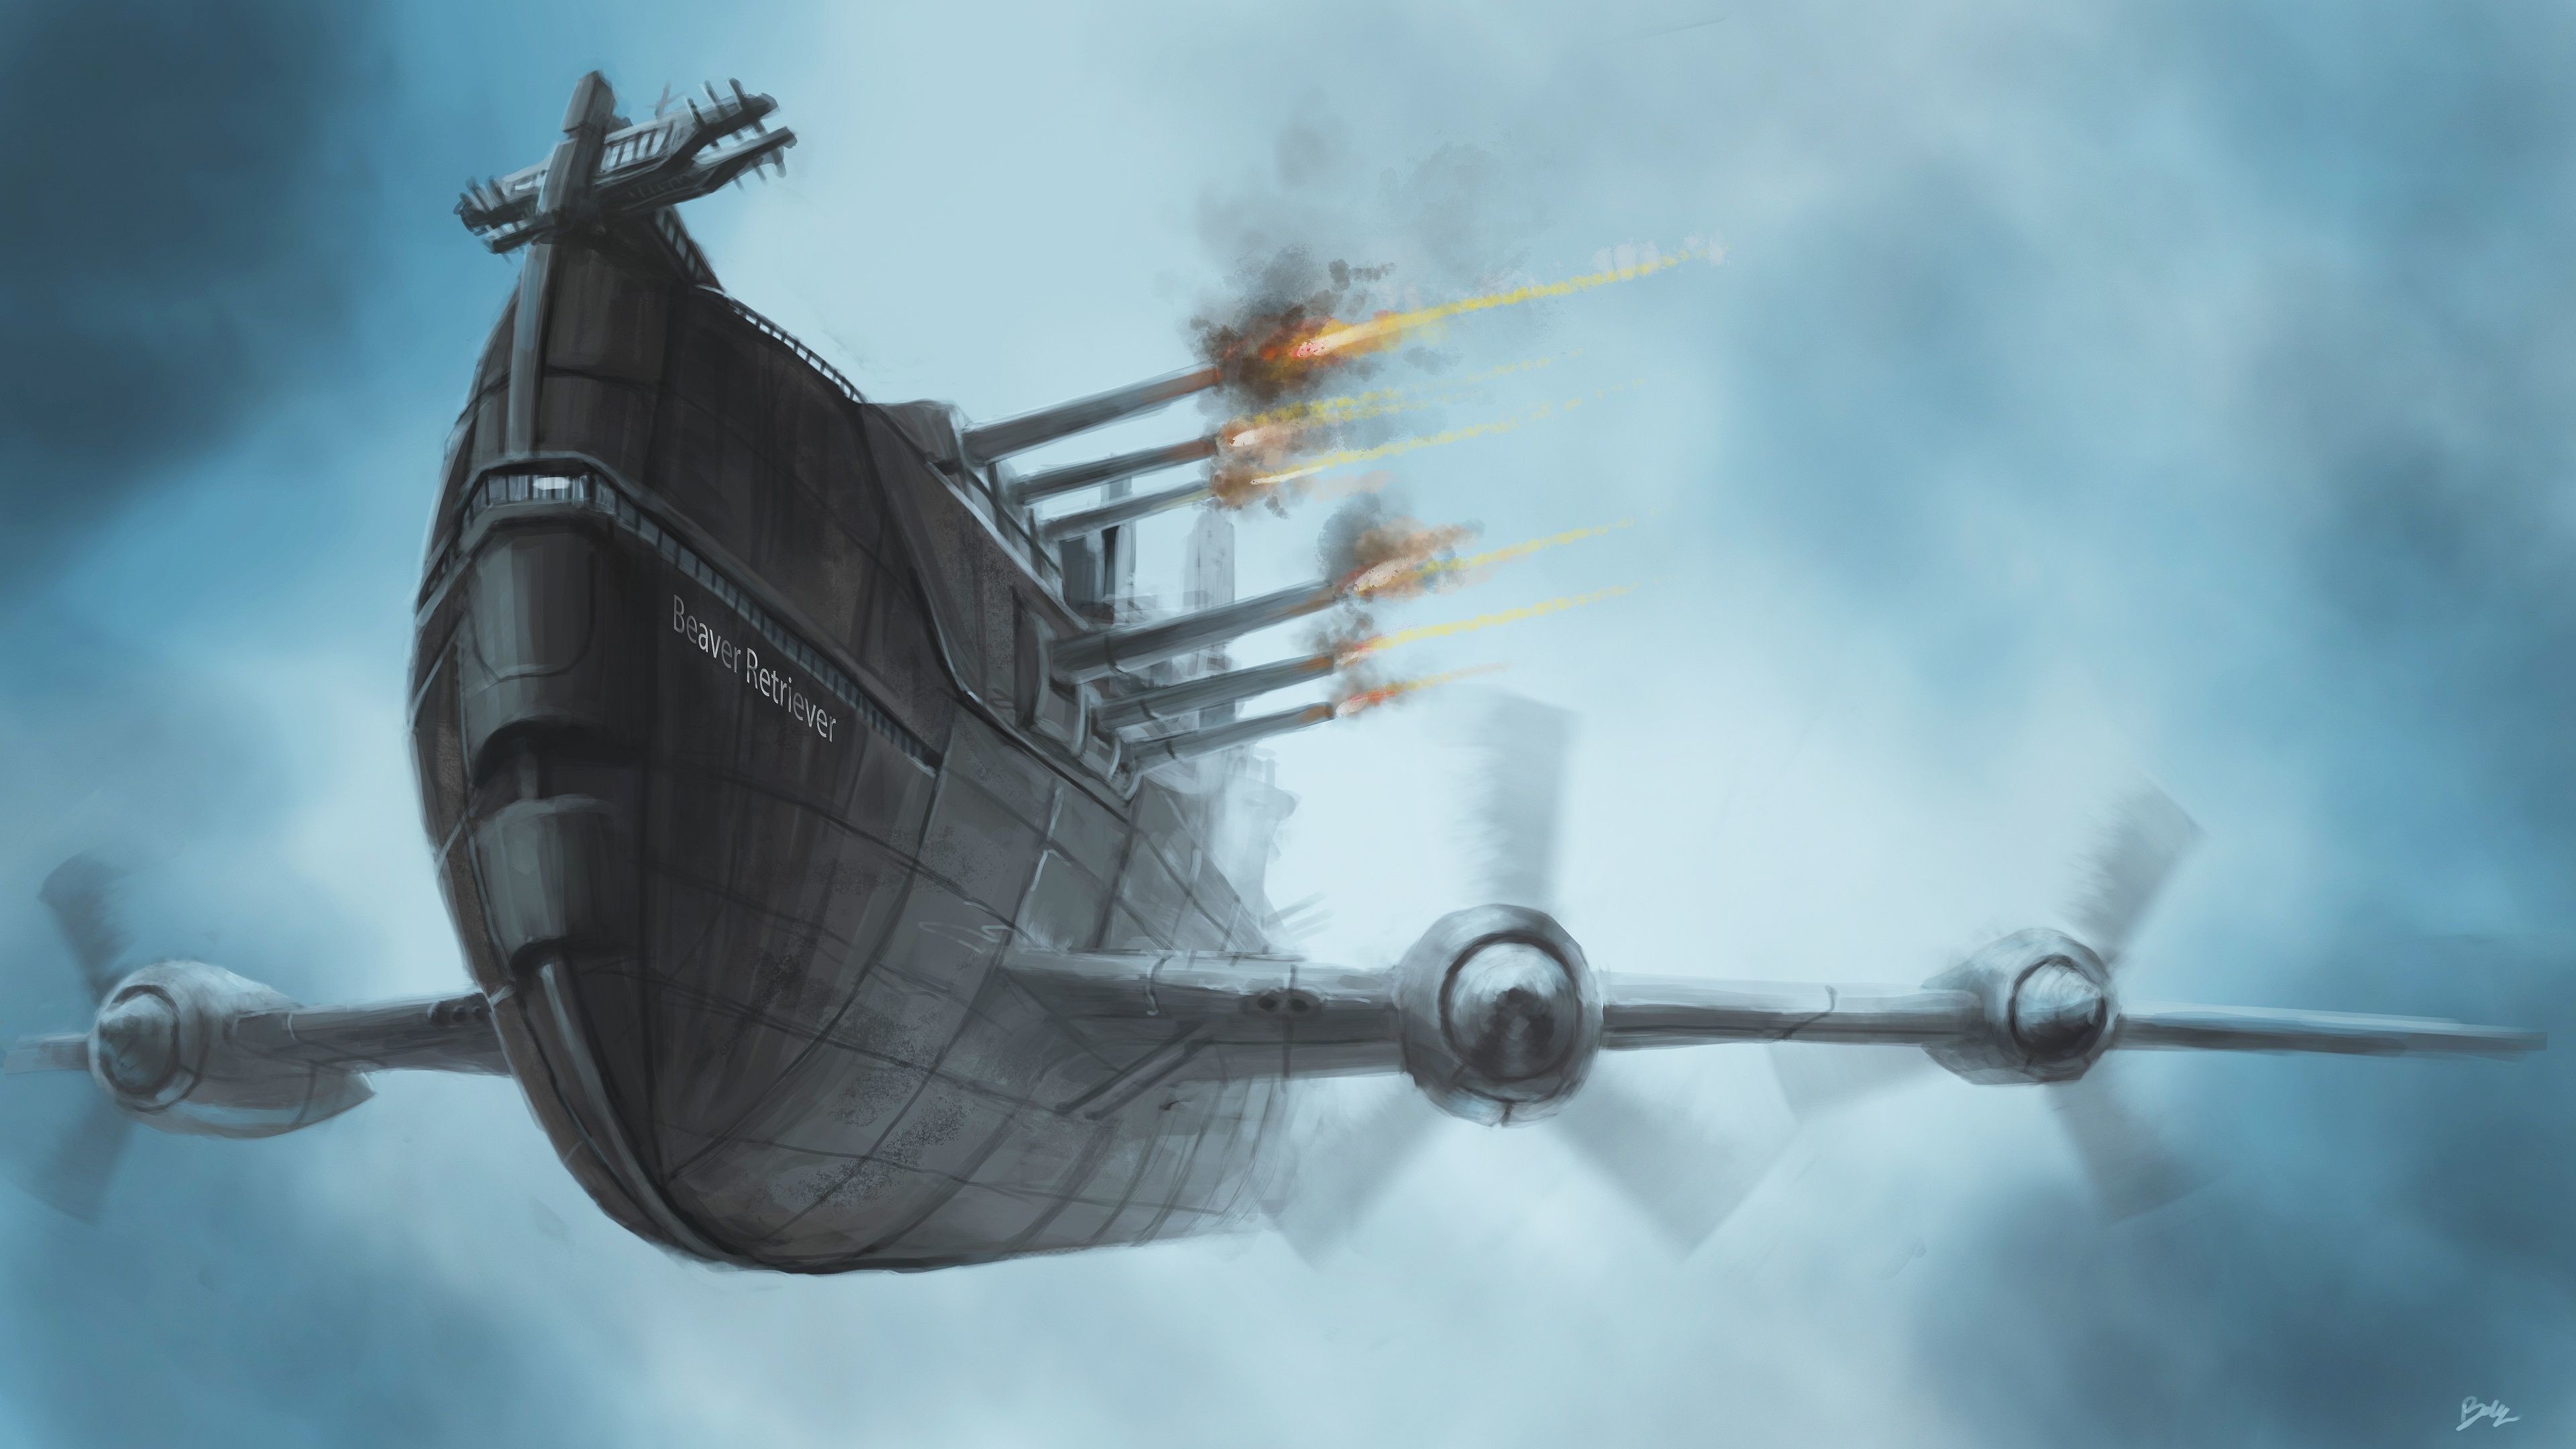 3840x2160 Troop steampunk airship wallpapers and images - wallpapers .